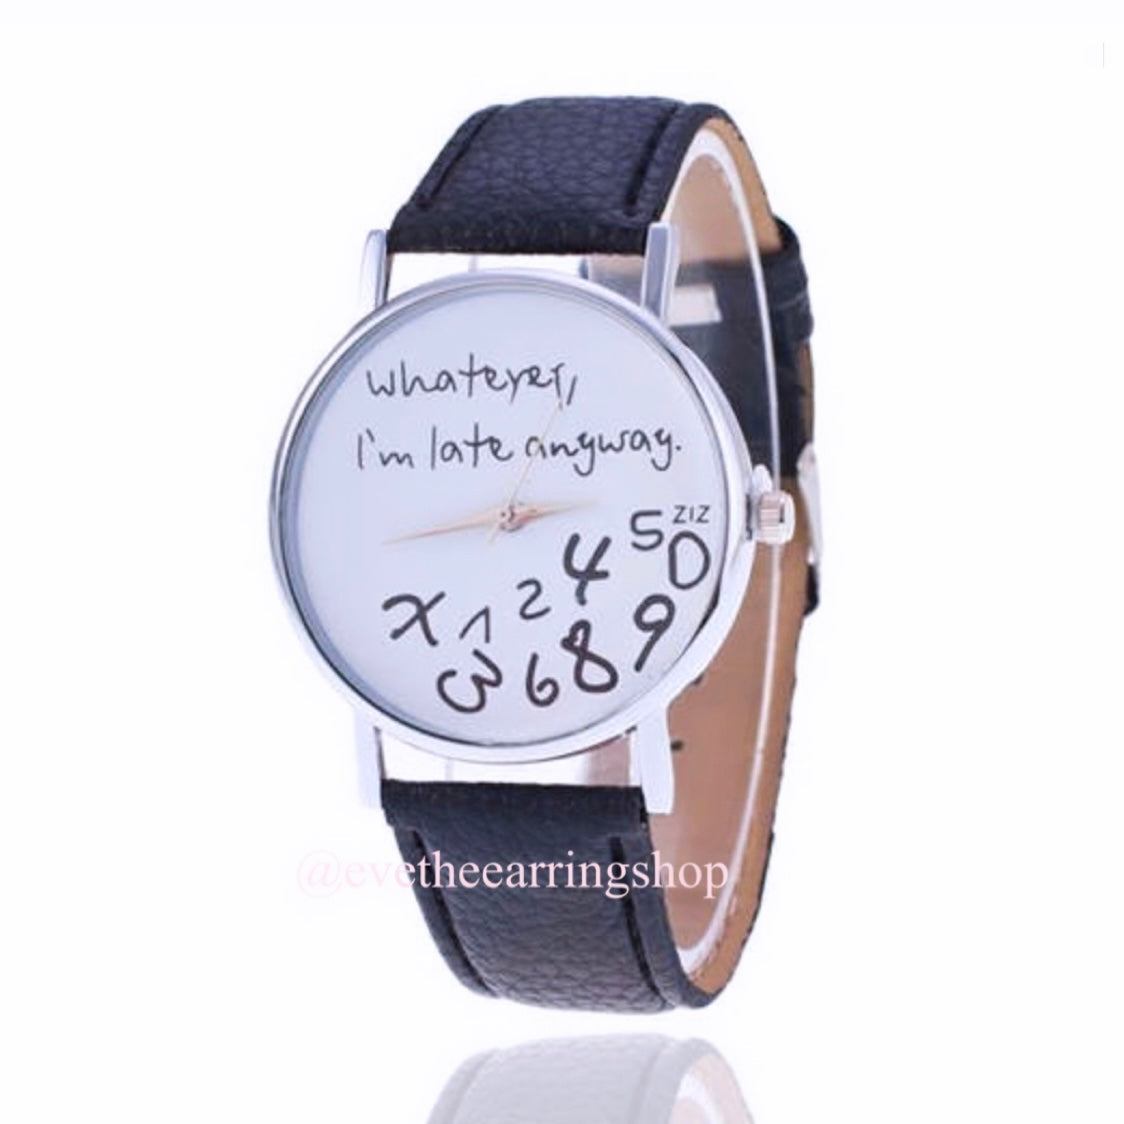 "I'M LATE" Casual Style Fashion Wrist Watch (Multiple Colours)